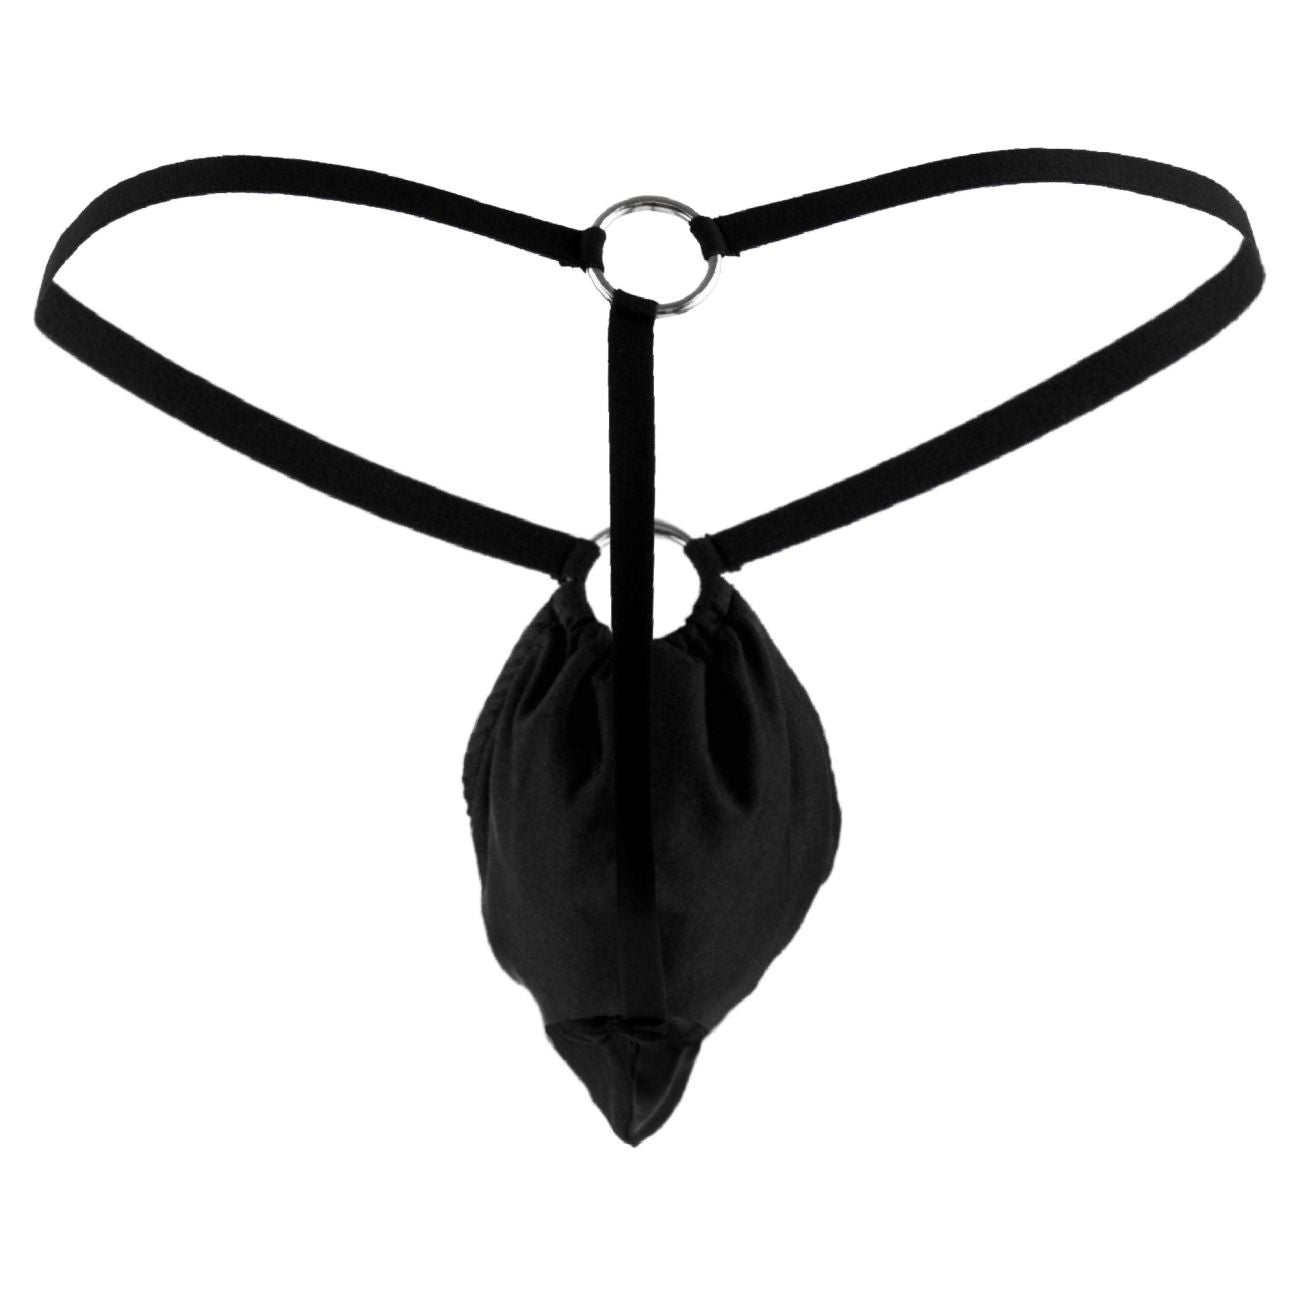 Male Power PAK825 G-String with front Ring